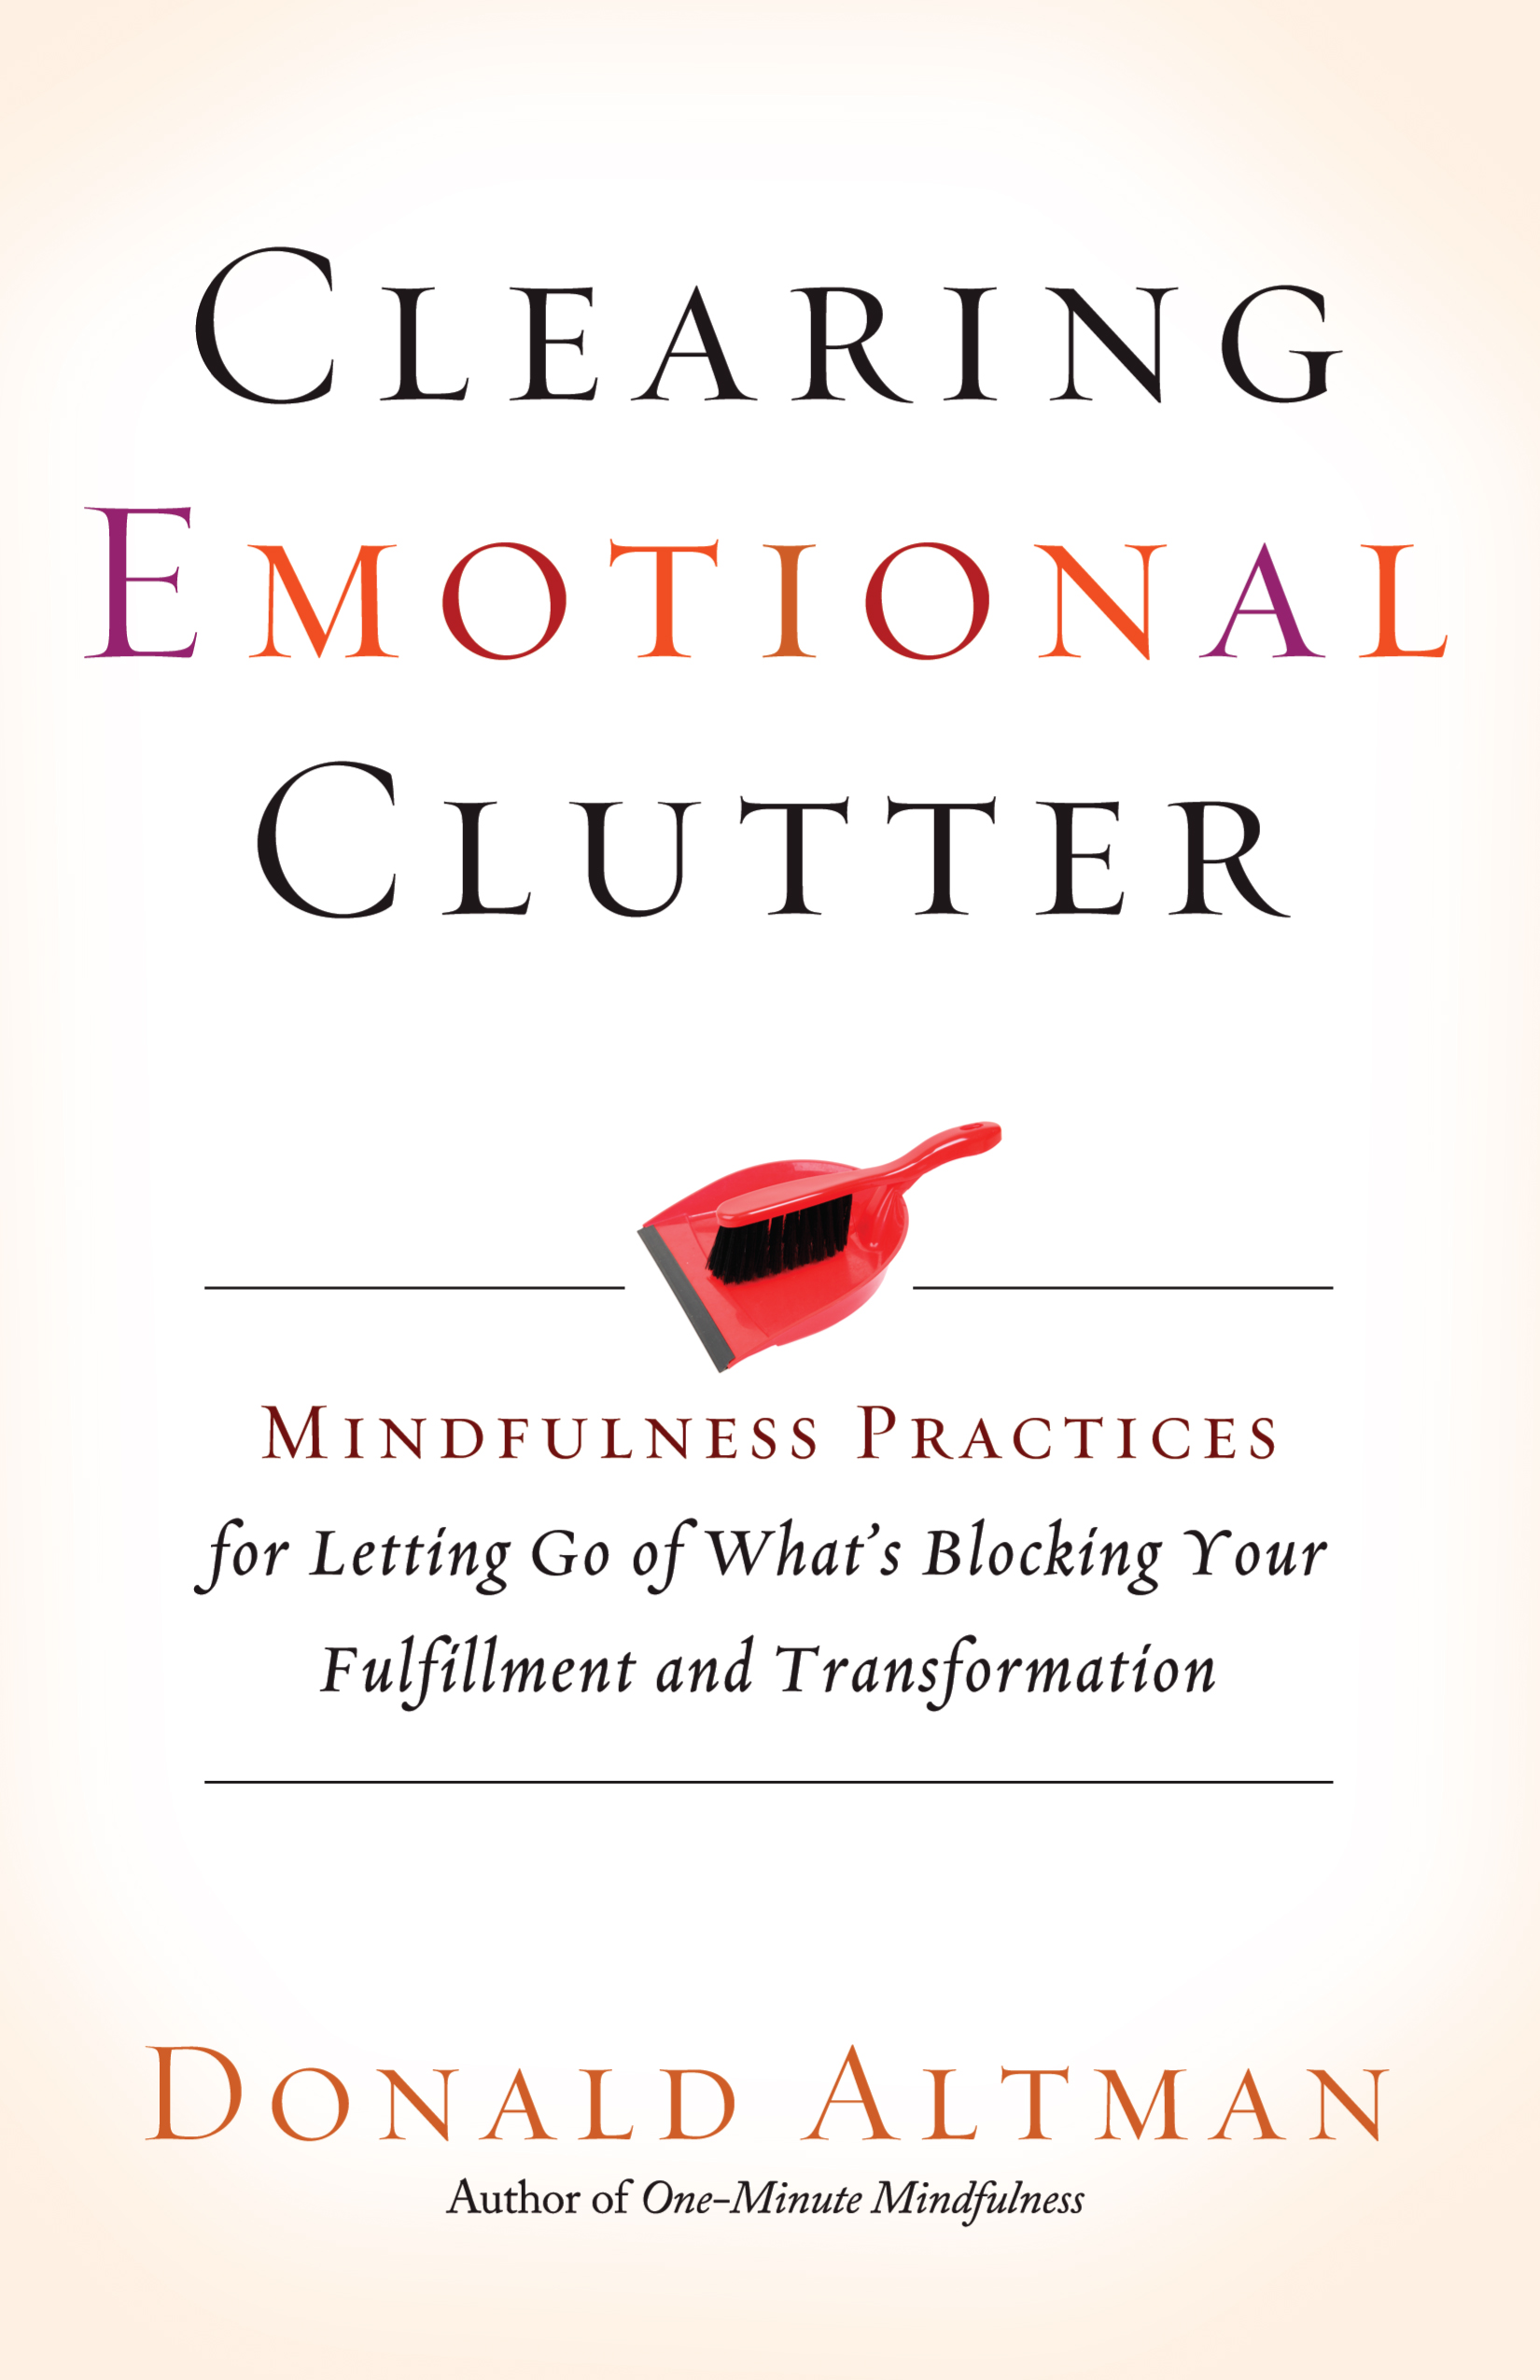 Imagen de portada para Clearing Emotional Clutter [electronic resource] : Mindfulness Practices for Letting Go of What's Blocking Your Fulfillment and Transformation